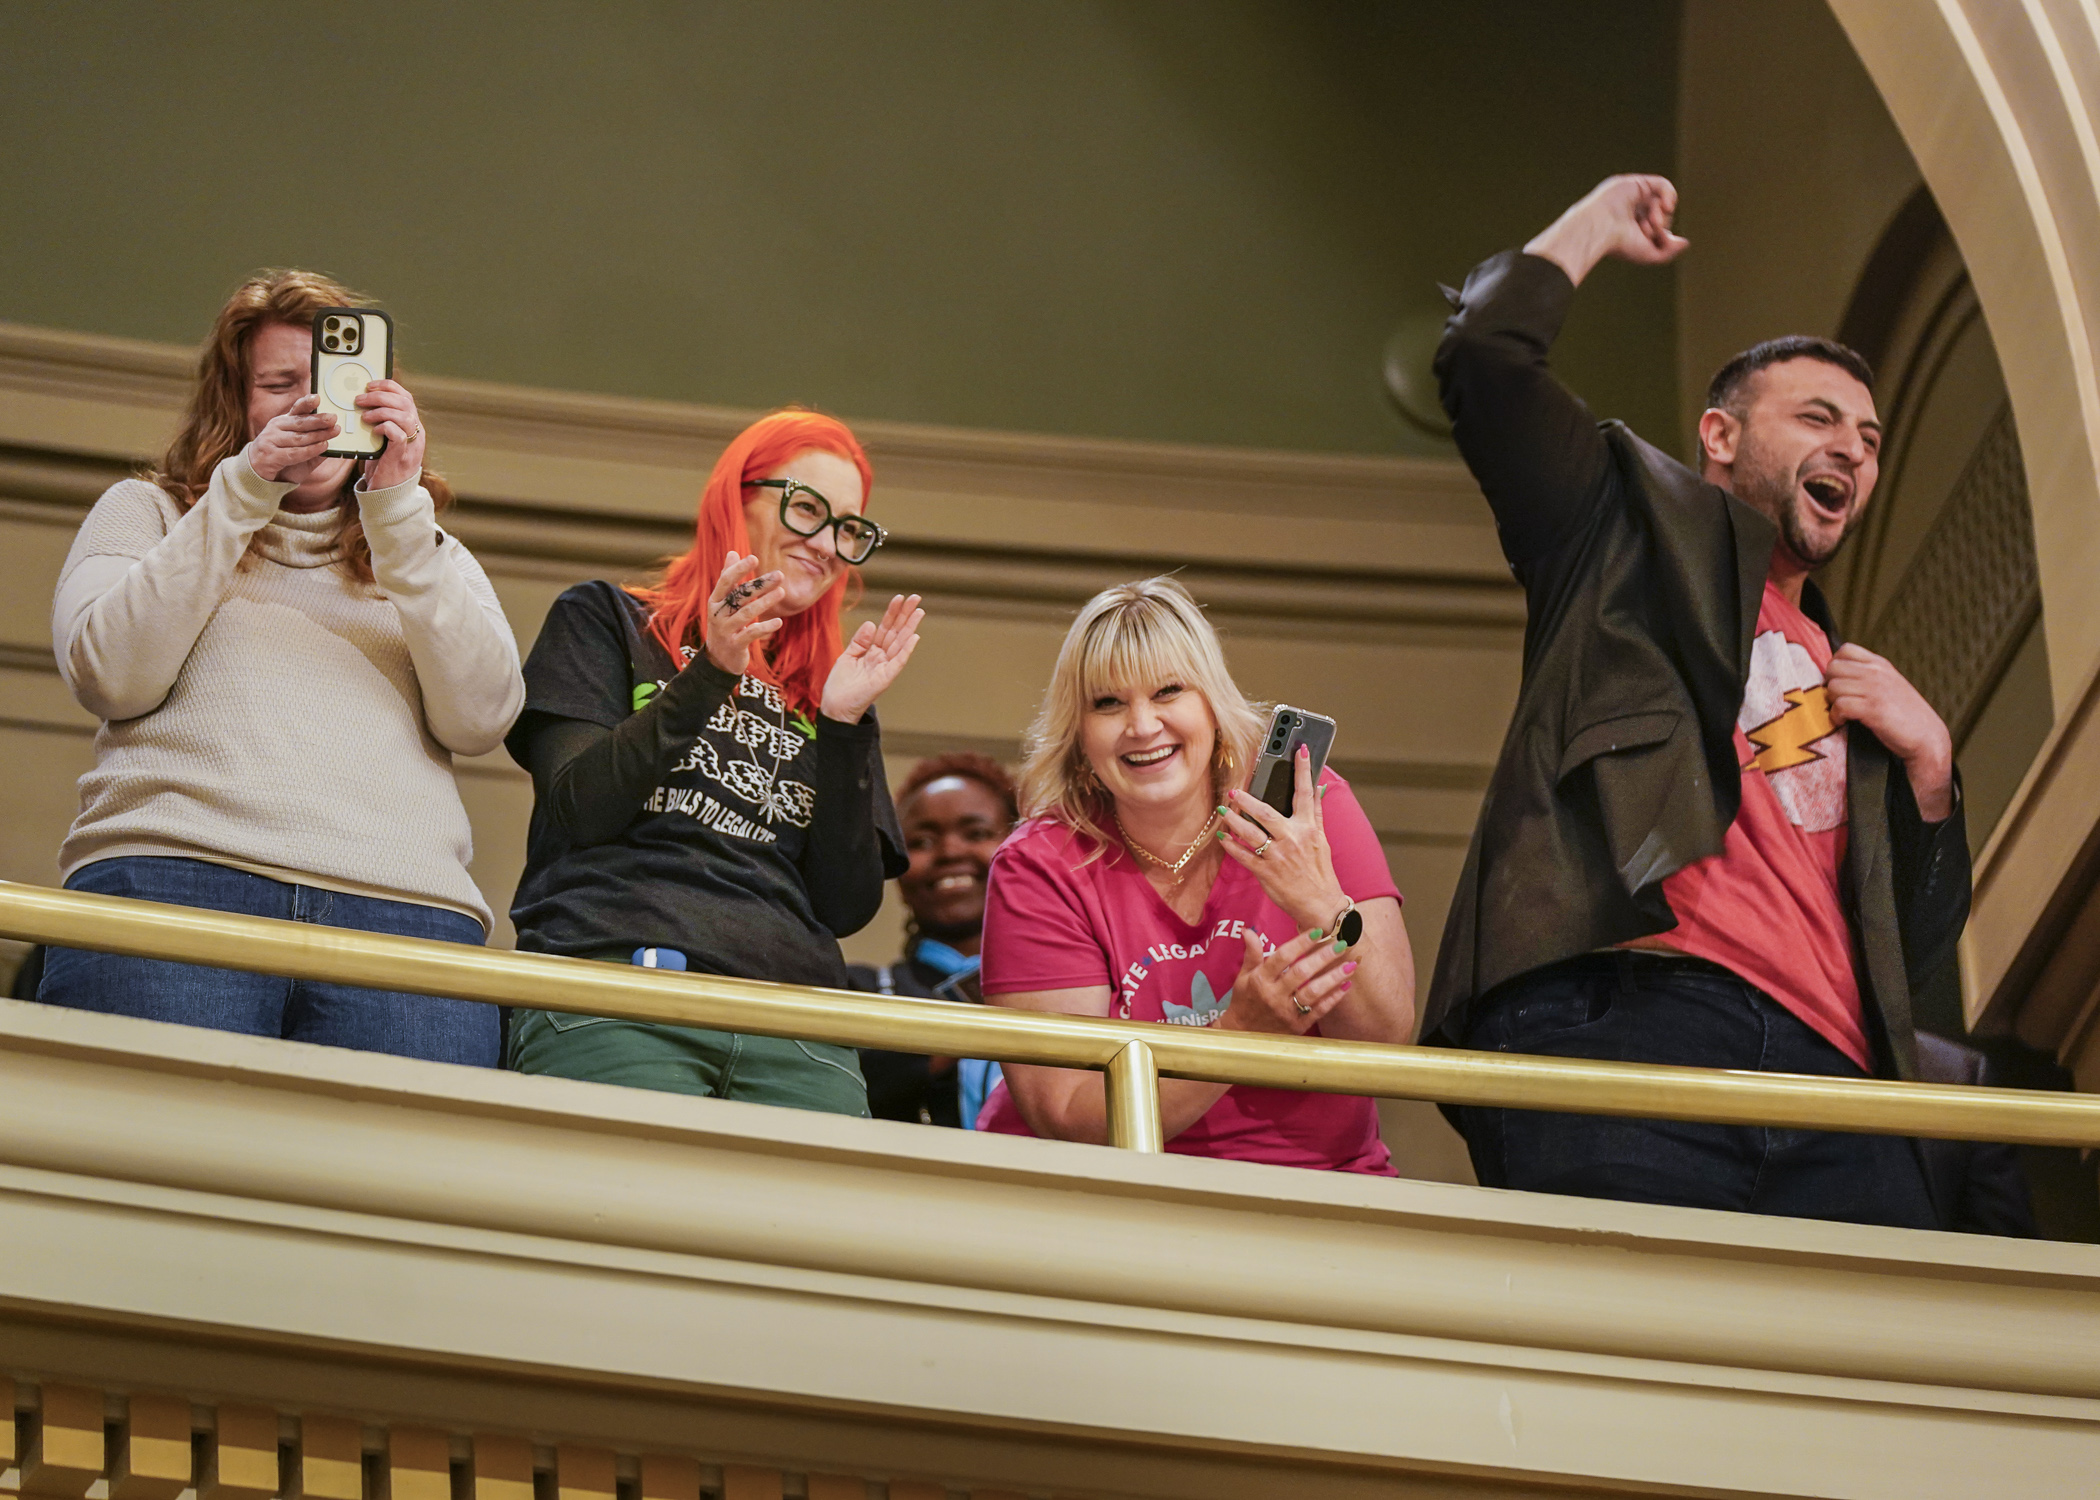 Cheering from the gallery, supporters of cannabis legalization Rachel Kane, Jamie Coyle, Bridget Pinder and Emilio Medina celebrate the passage of HF100 off the House Floor April 25. (Photo by Catherine Davis)